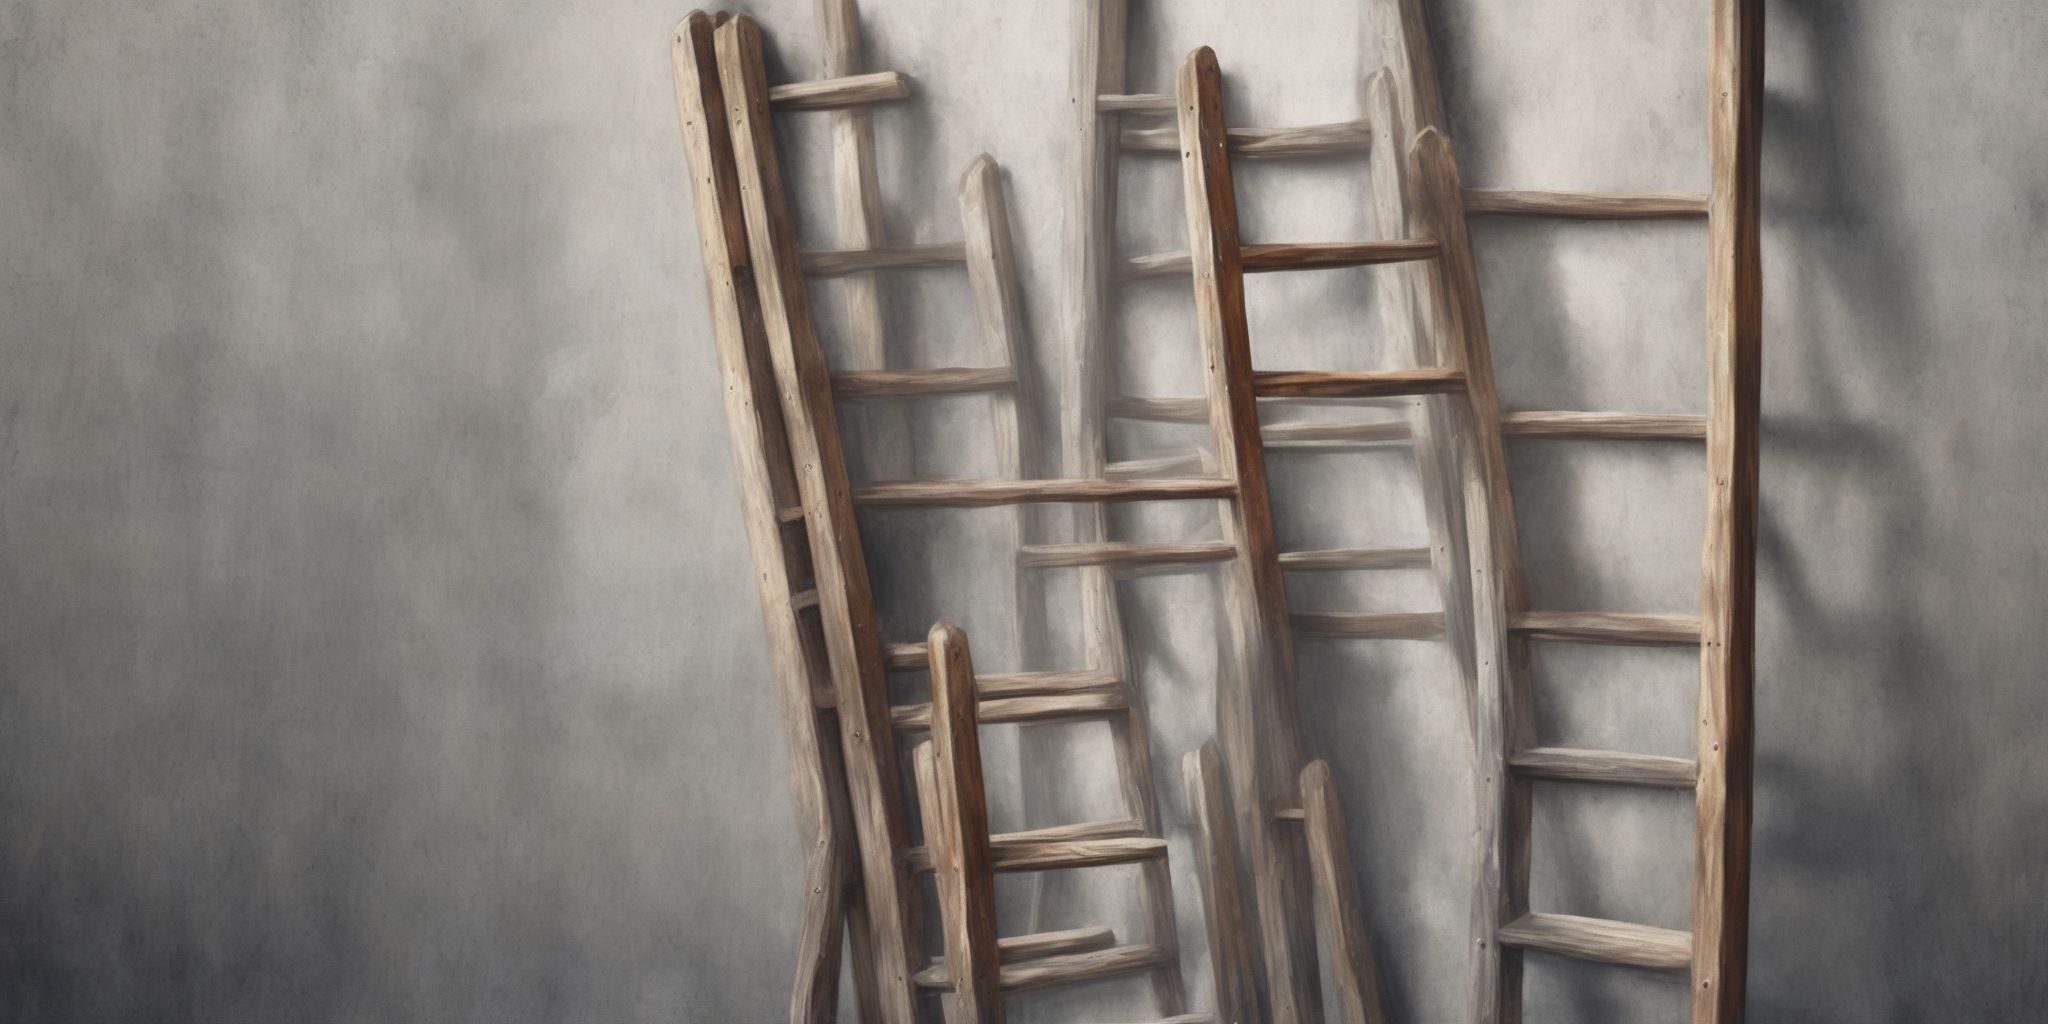 Ladder  in realistic, photographic style